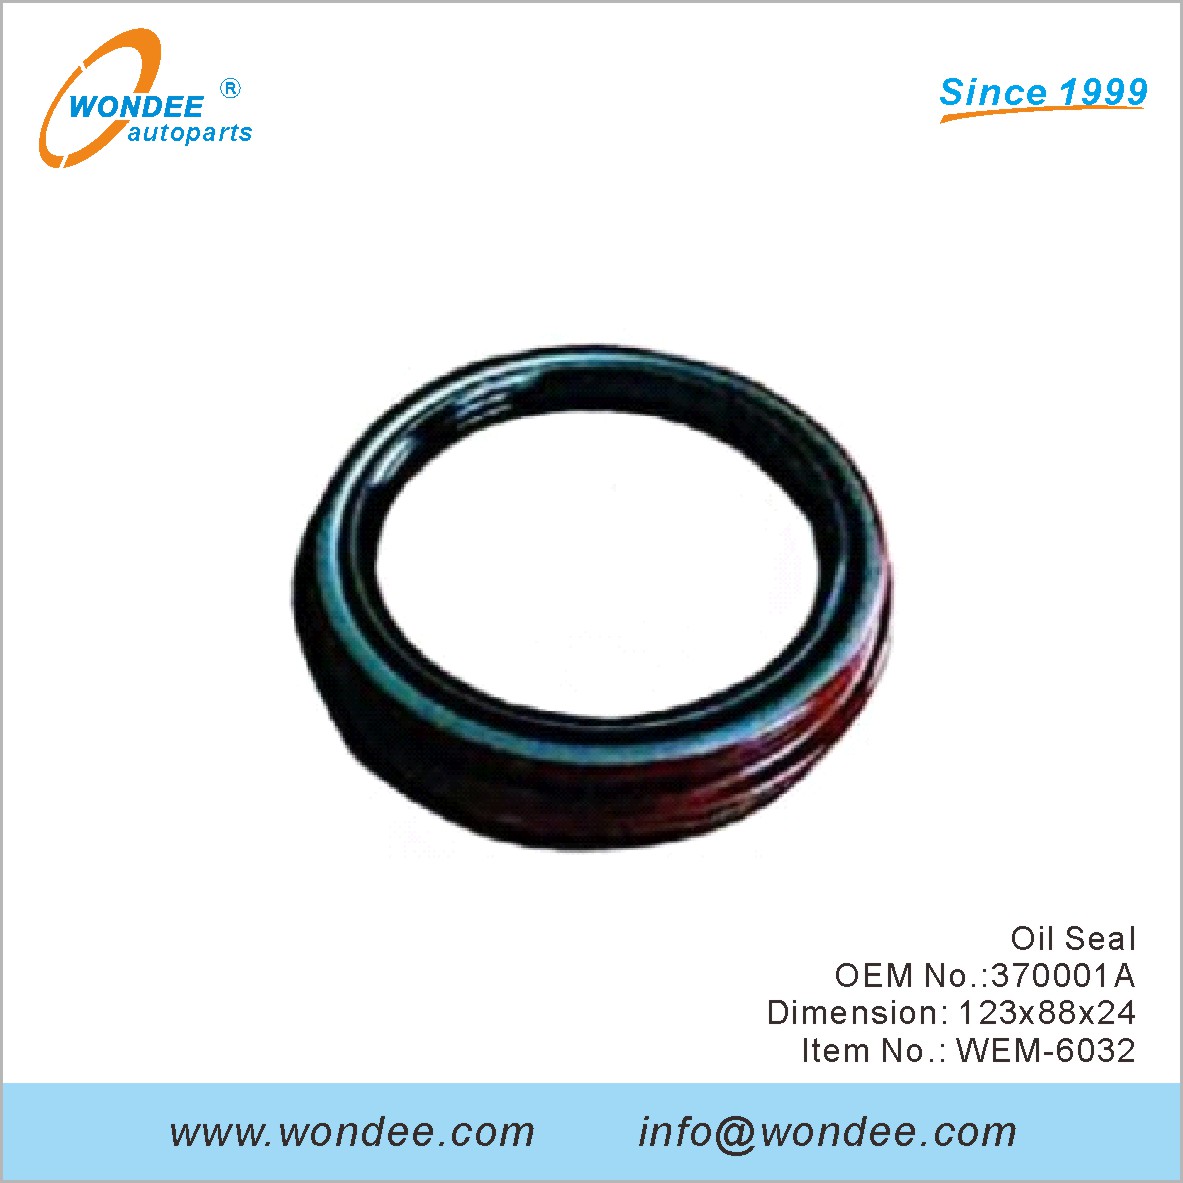 Oil Seal OEM 370001A for engine mouting from WONDEE (2)